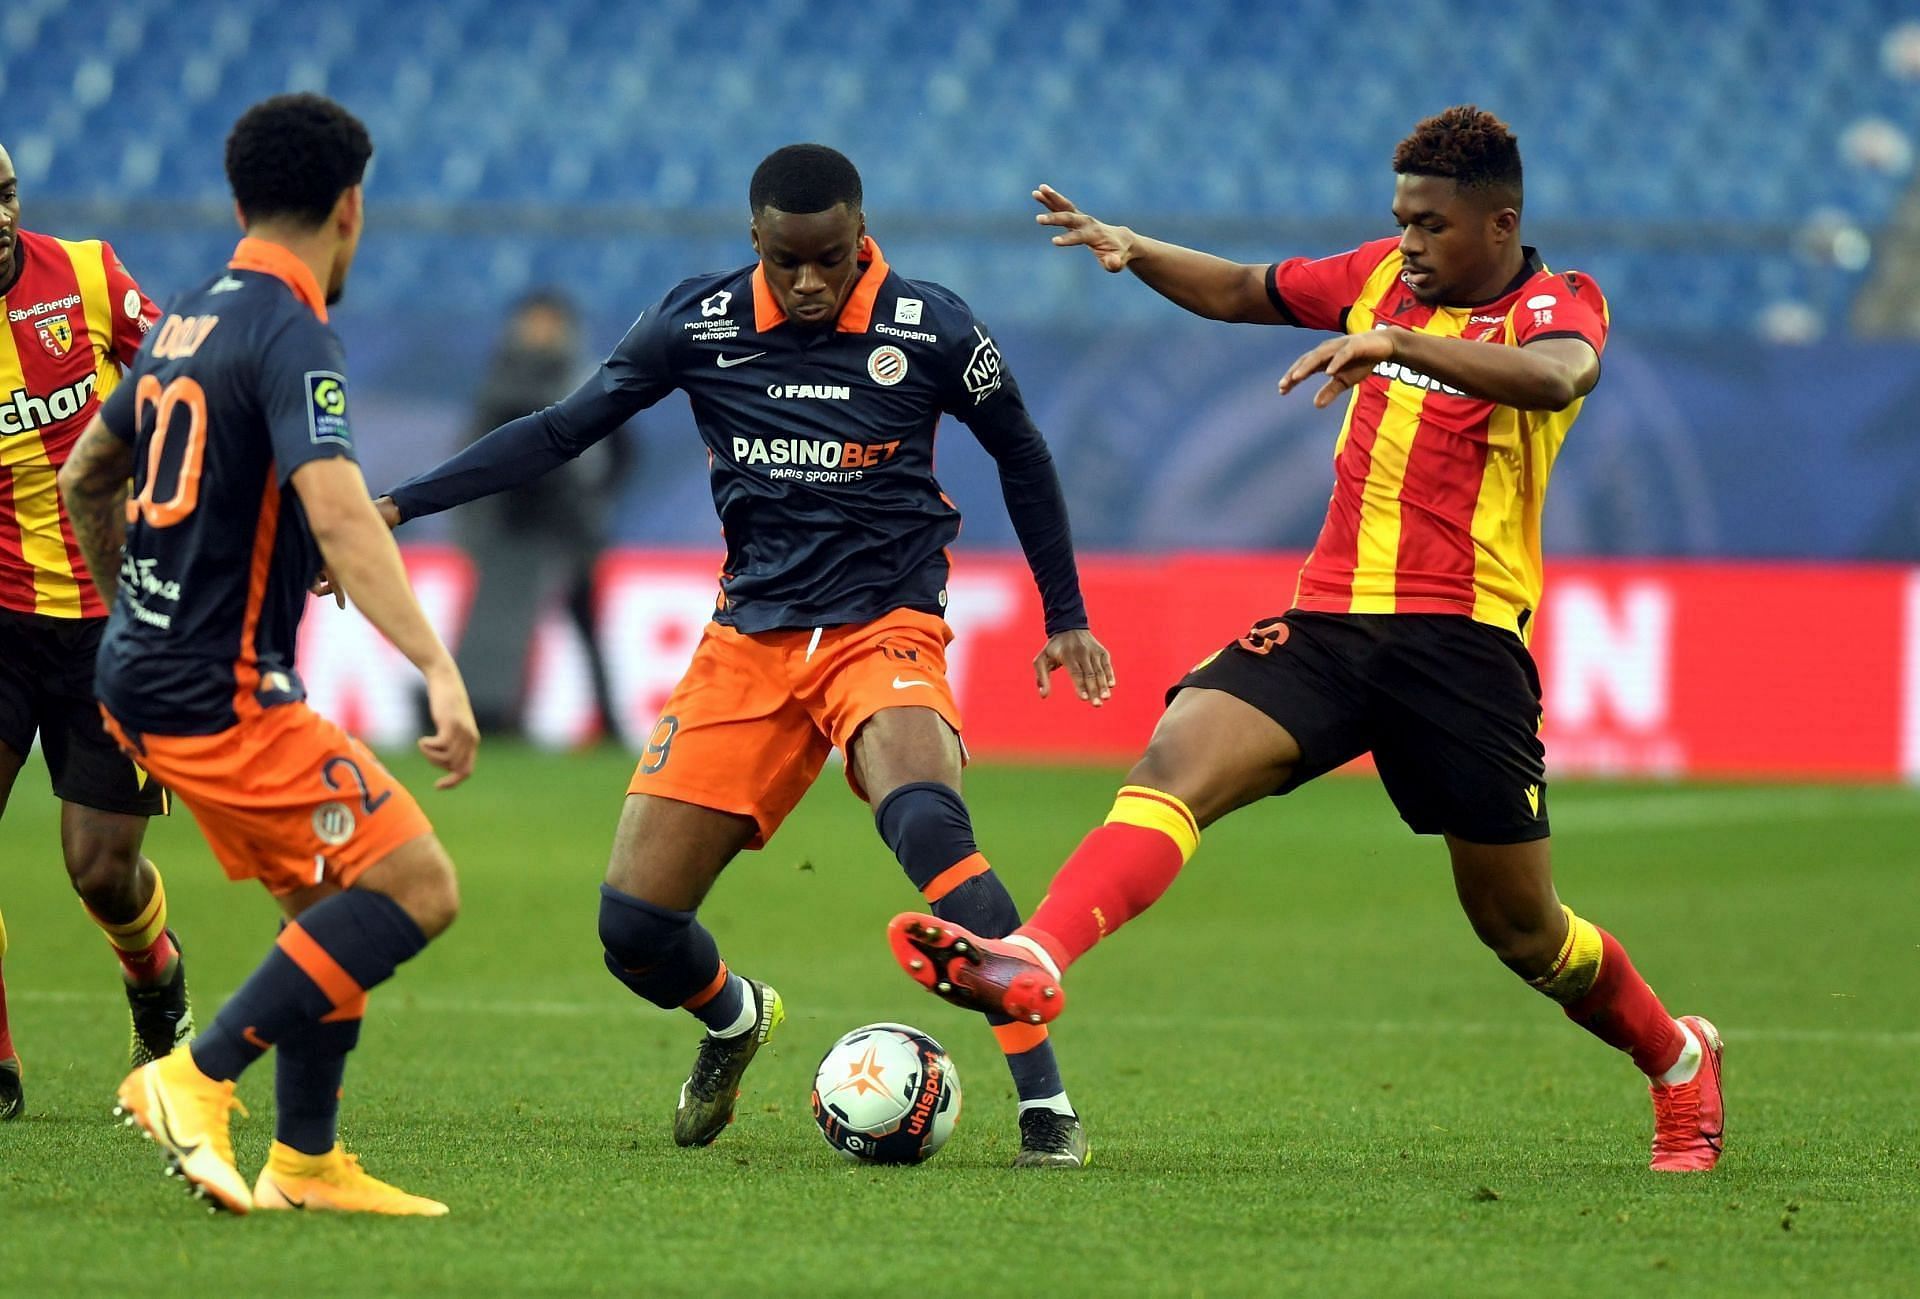 Montpellier and Lens go head-to-head in the Ligue 1 on Friday